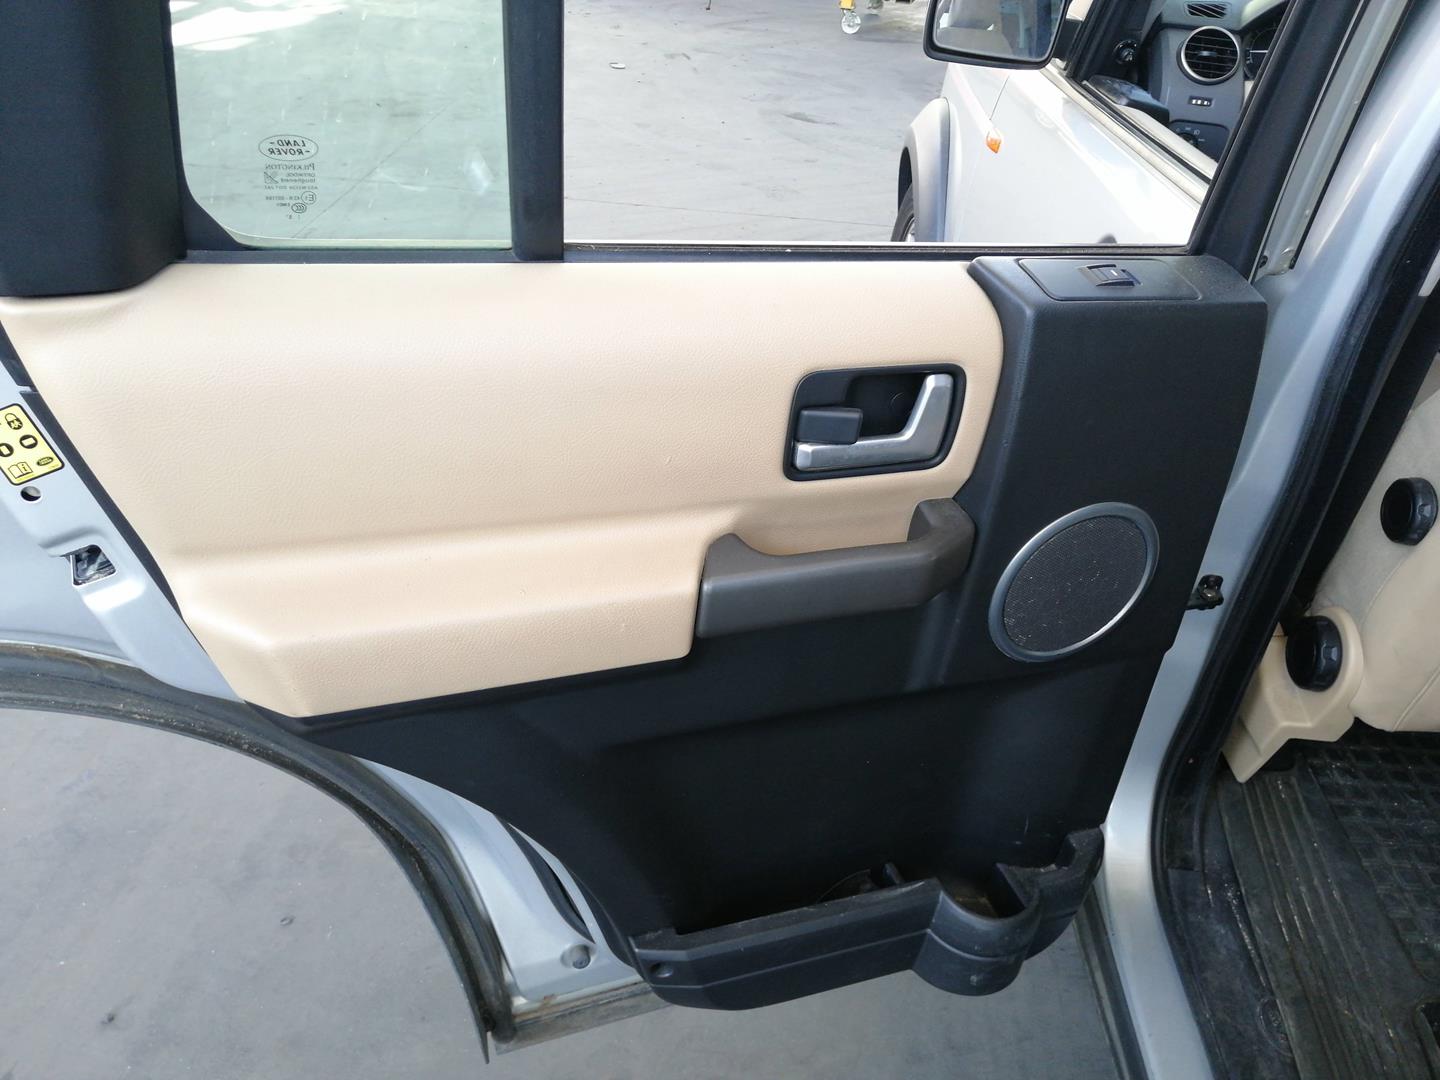 LAND ROVER Discovery 4 generation (2009-2016) Other Interior Parts XDE500420LUM, LUZINTETRASERA 20803293